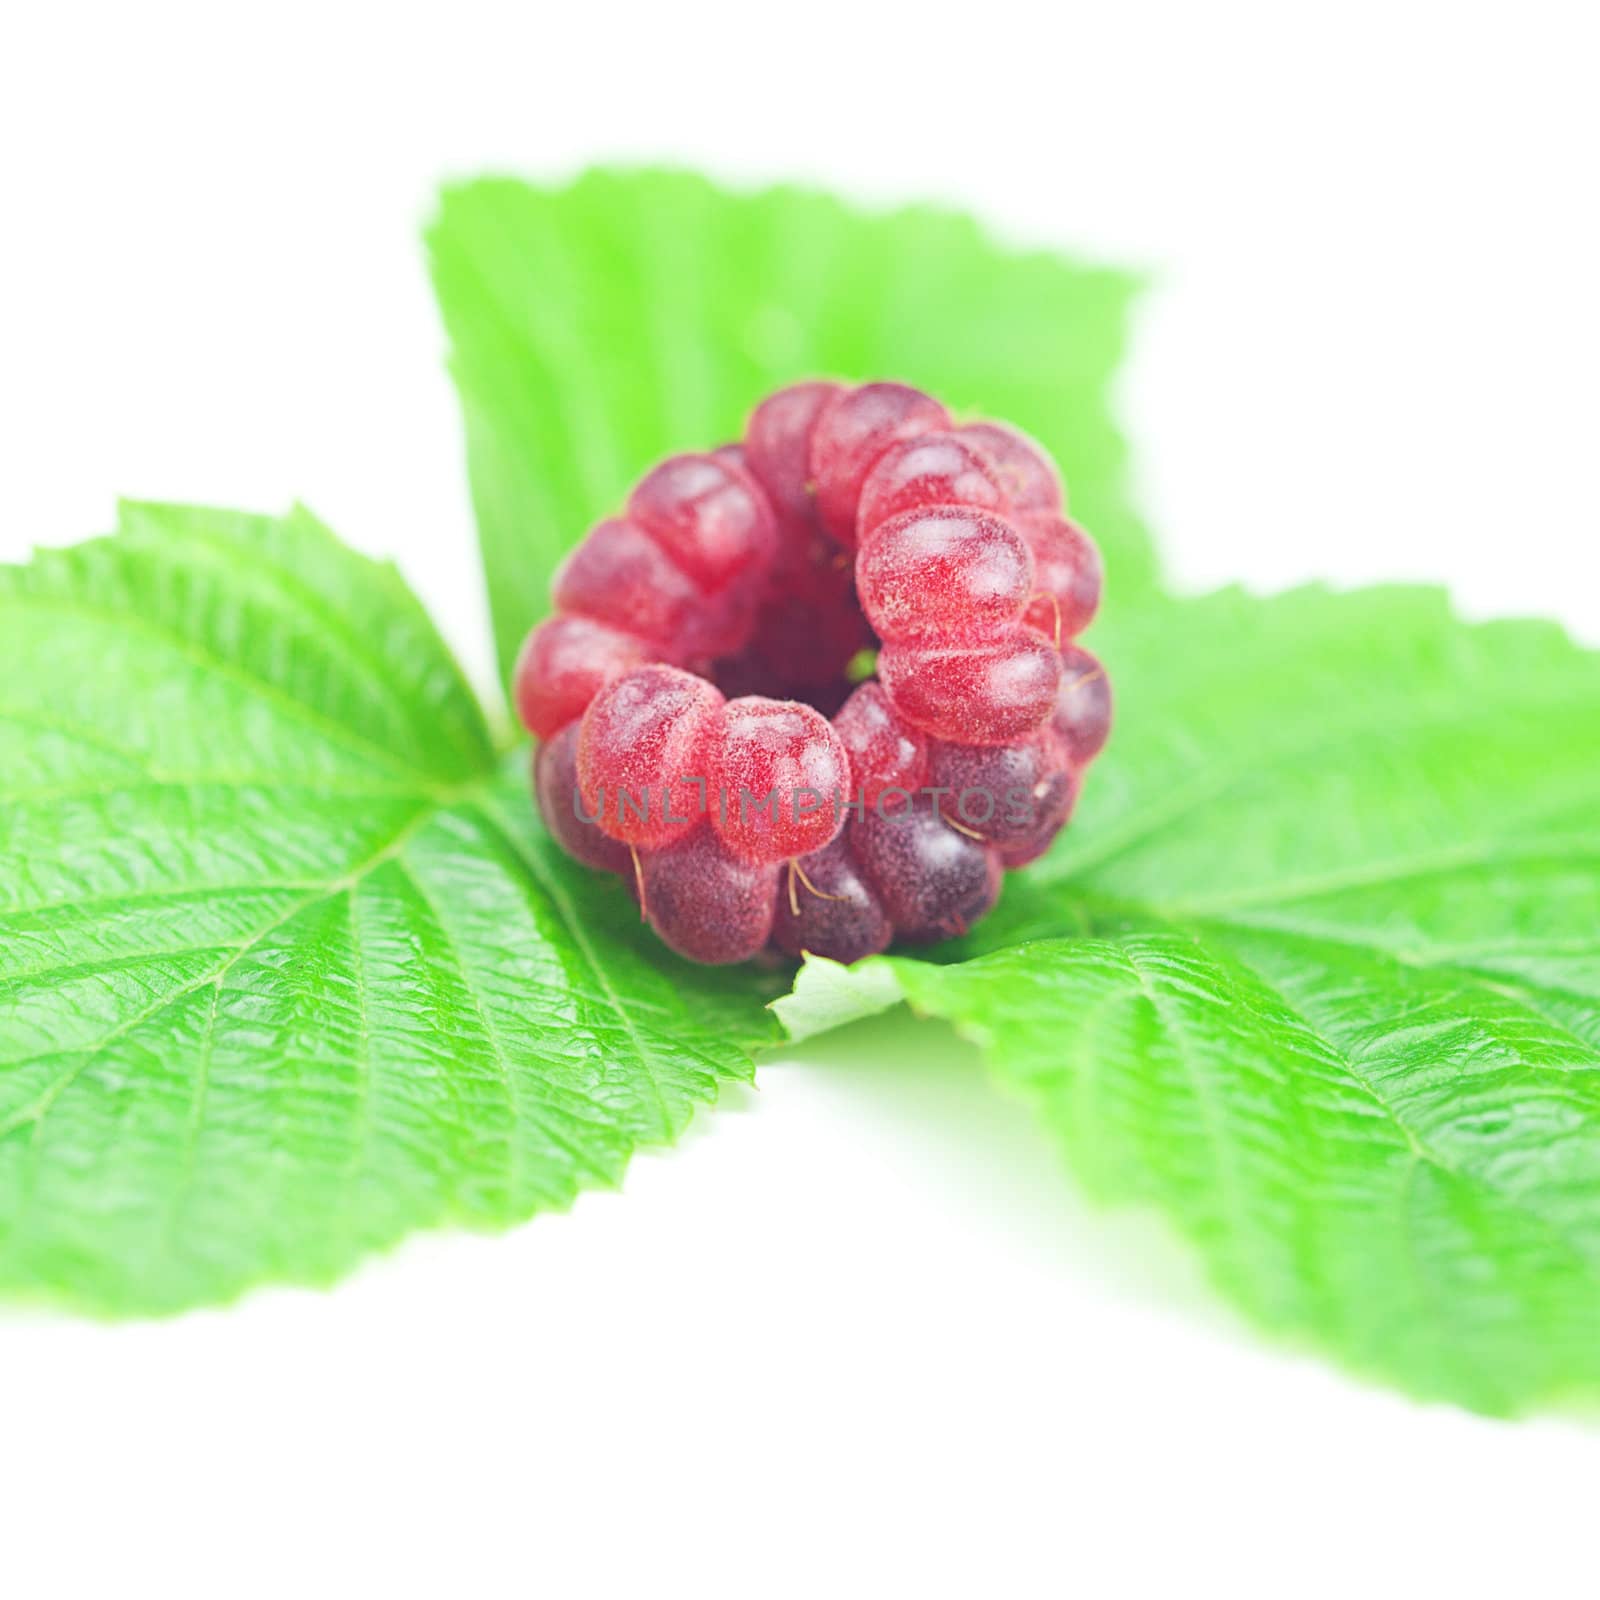 Raspberries and green leaves on white background